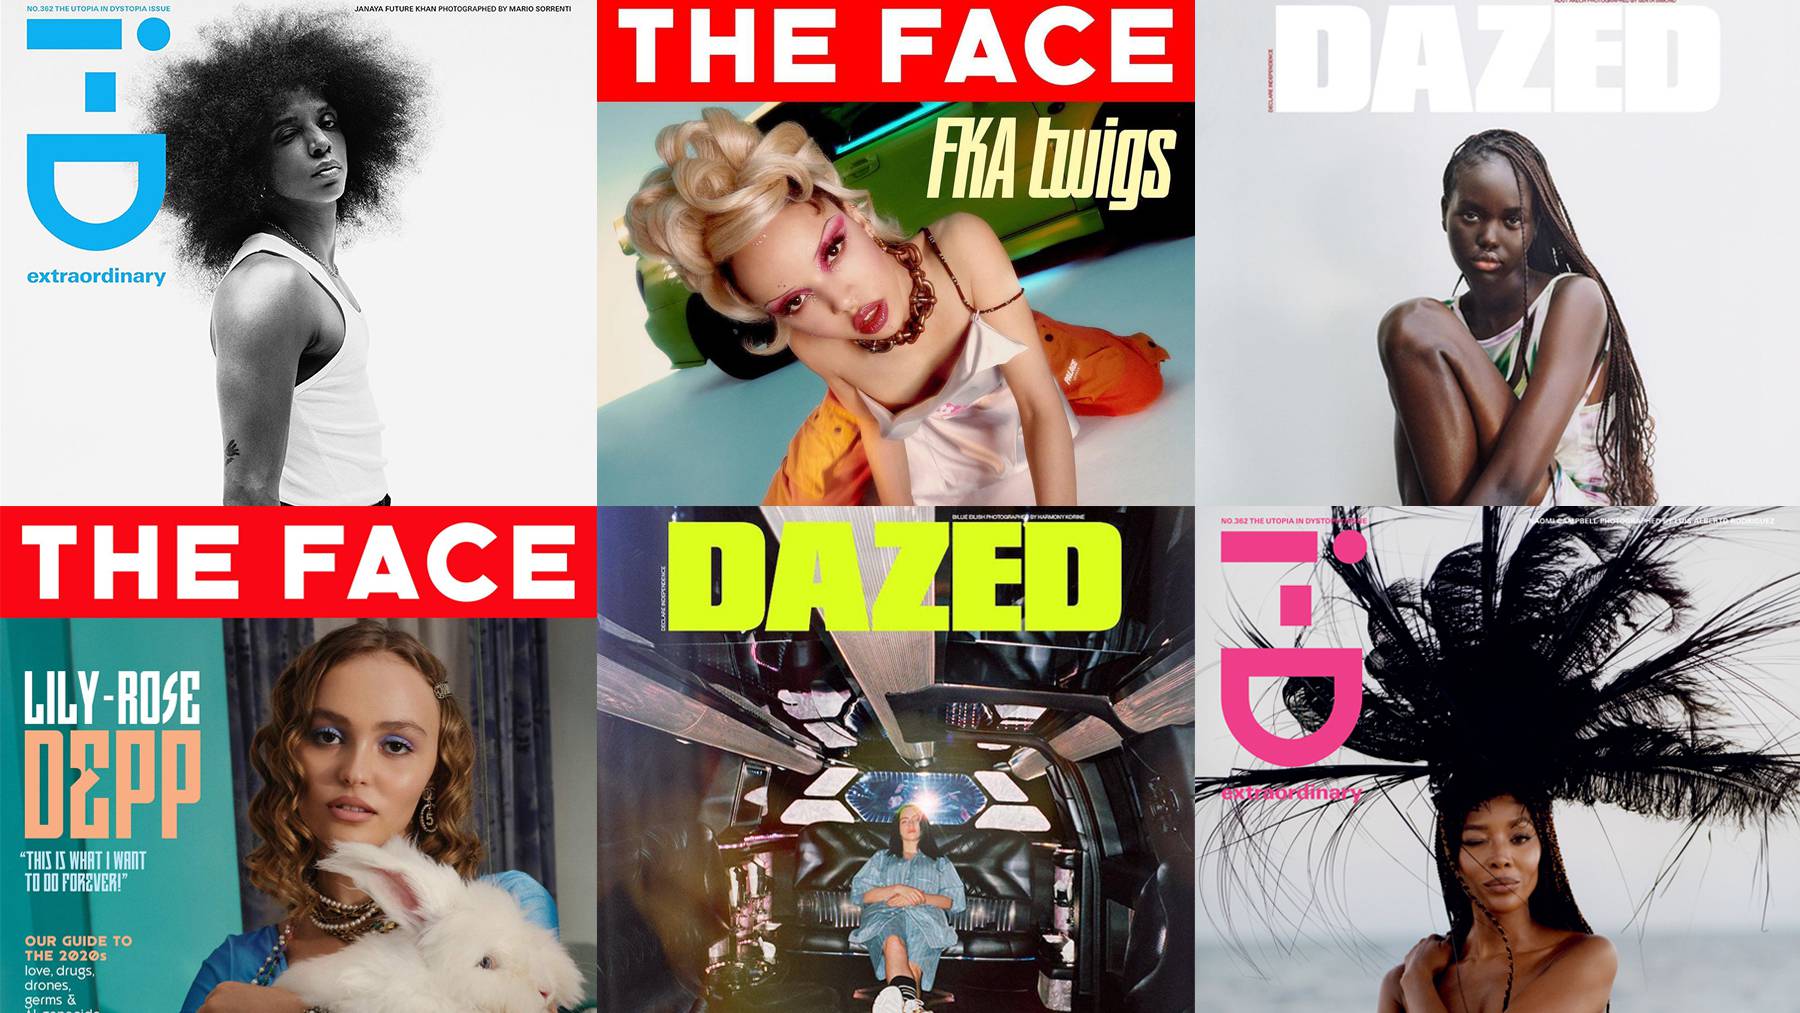 Recent covers of i-D, The Face, Dazed. Courtesy